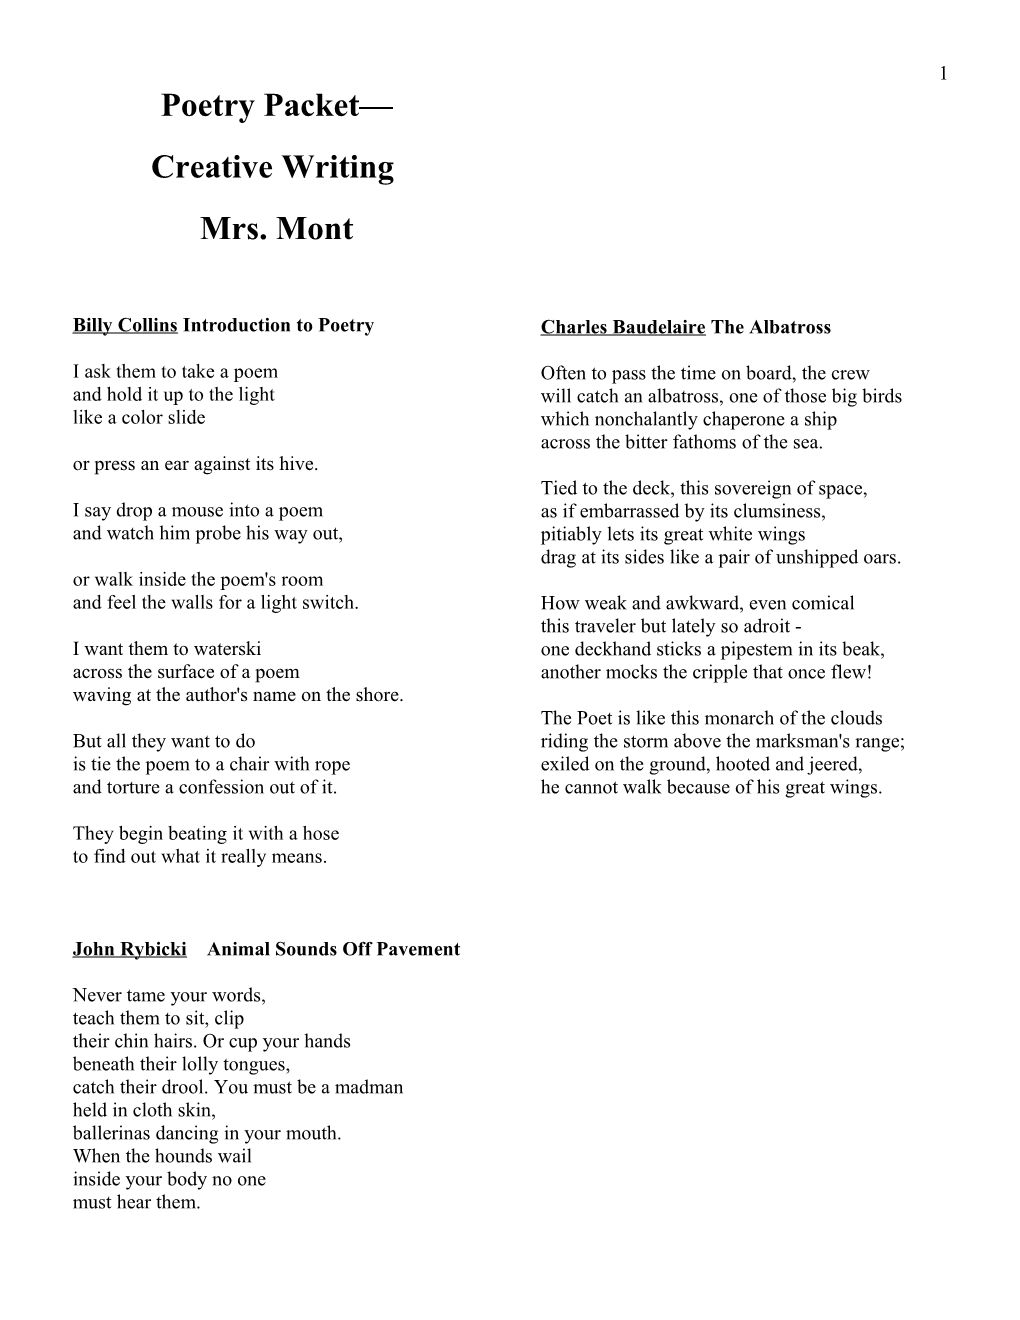 Billy Collins Introduction to Poetry